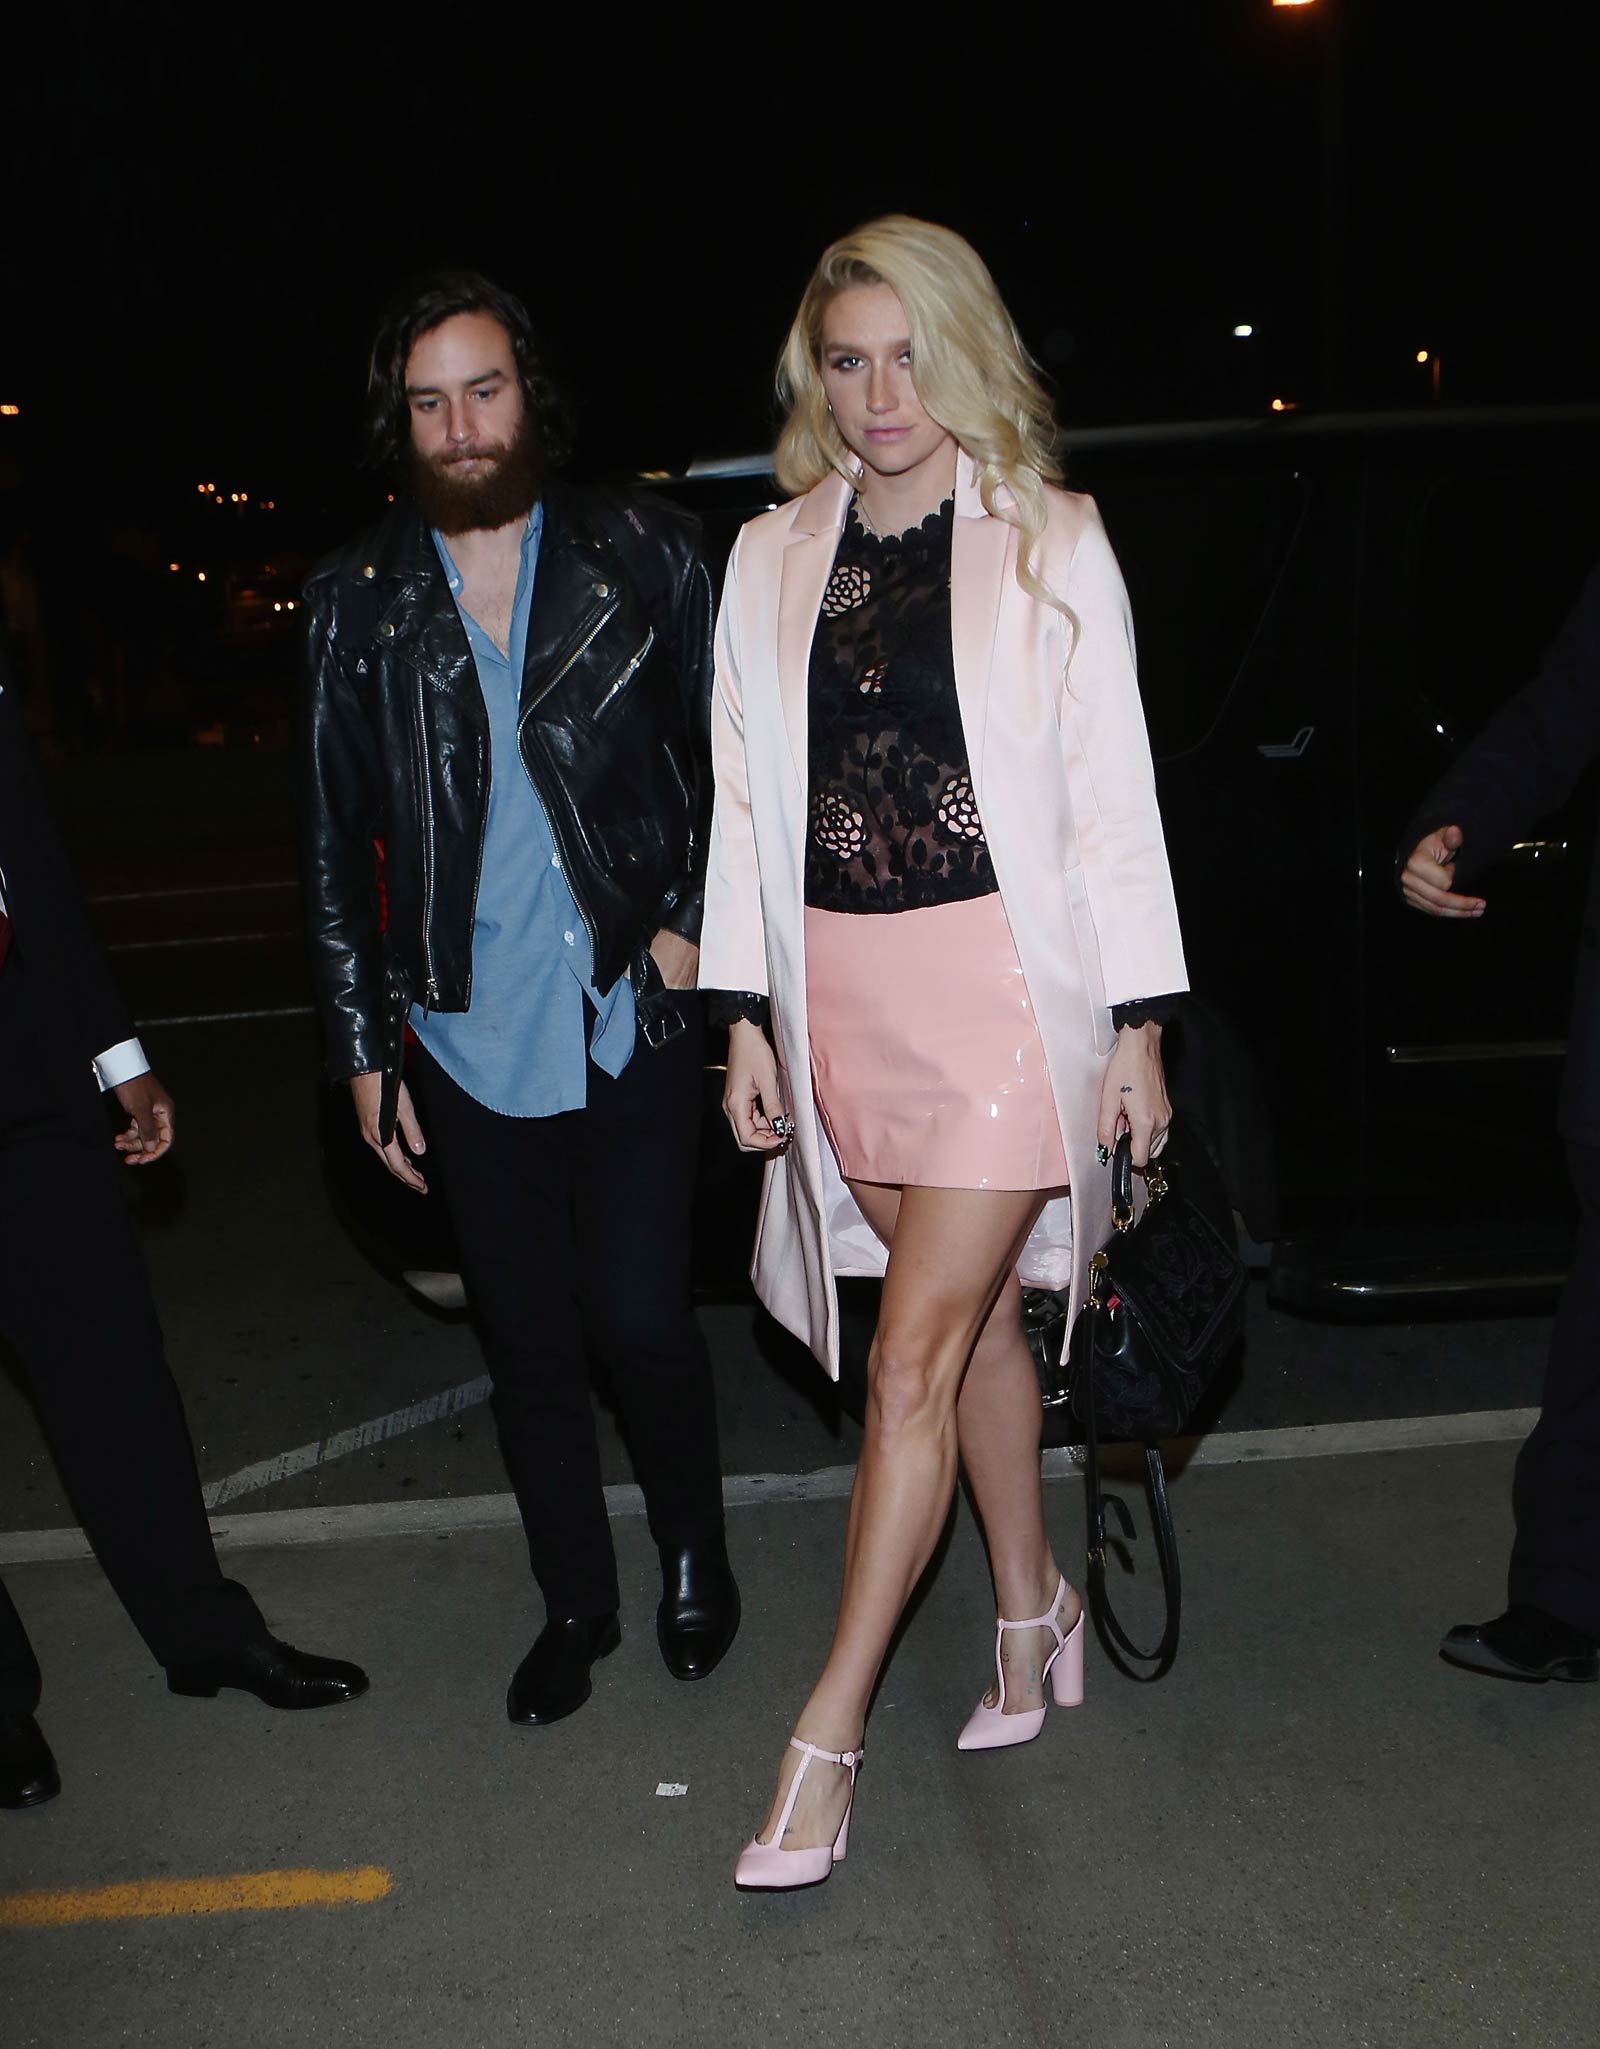 Kesha departing on a flight at LAX airport in Los Angeles